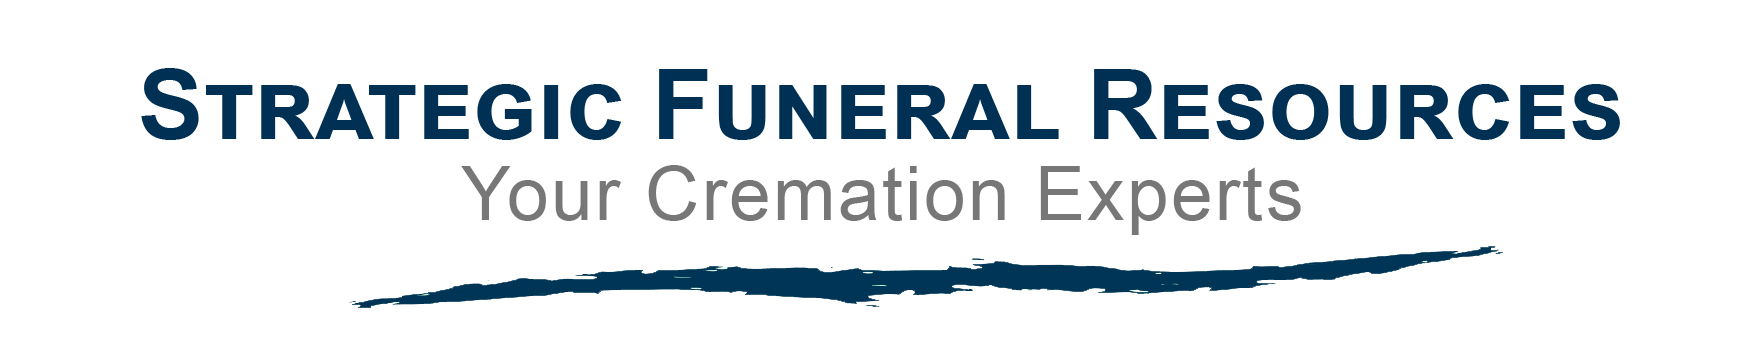 Strategic Funeral Resources